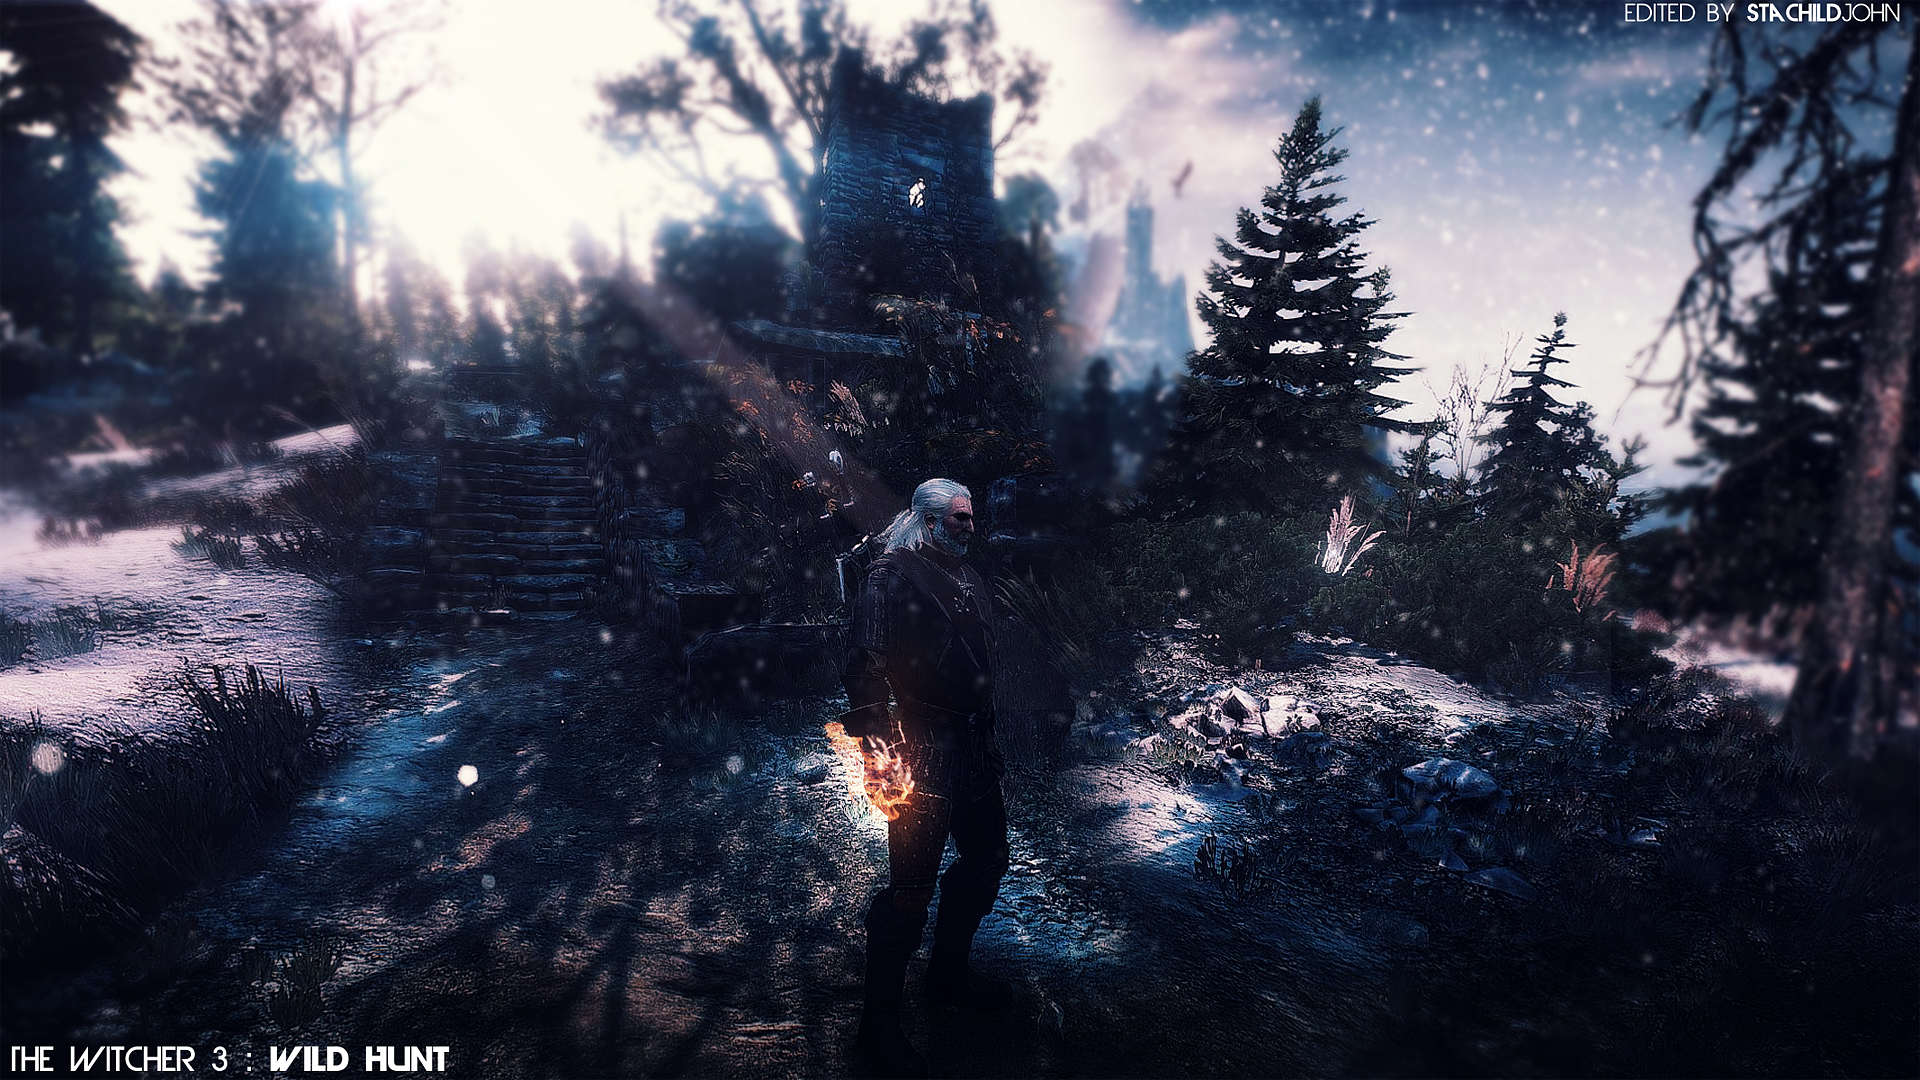 General 1920x1080 The Witcher 3: Wild Hunt video games Geralt of Rivia The Witcher RPG video game art video game characters video game men fantasy men PC gaming